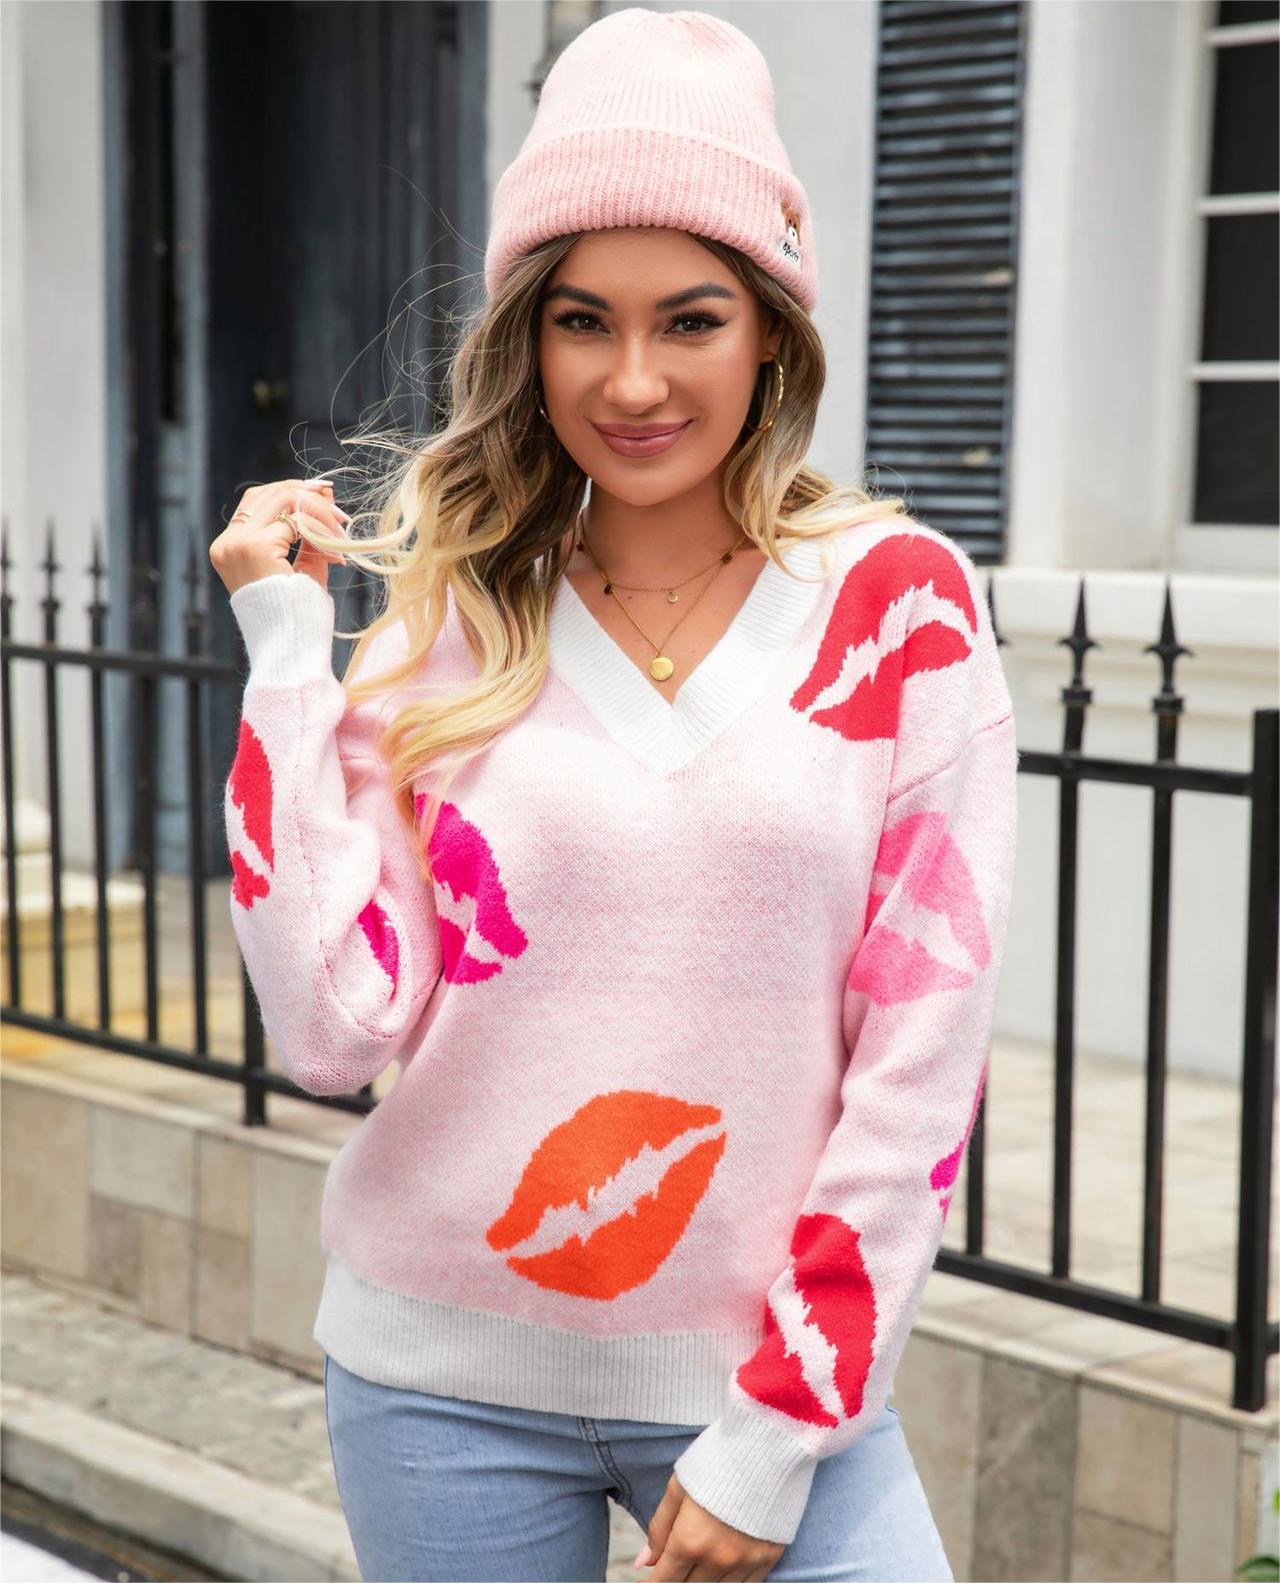 Lips Valentine Day Sweater V neck Knitted Pullover Sweater